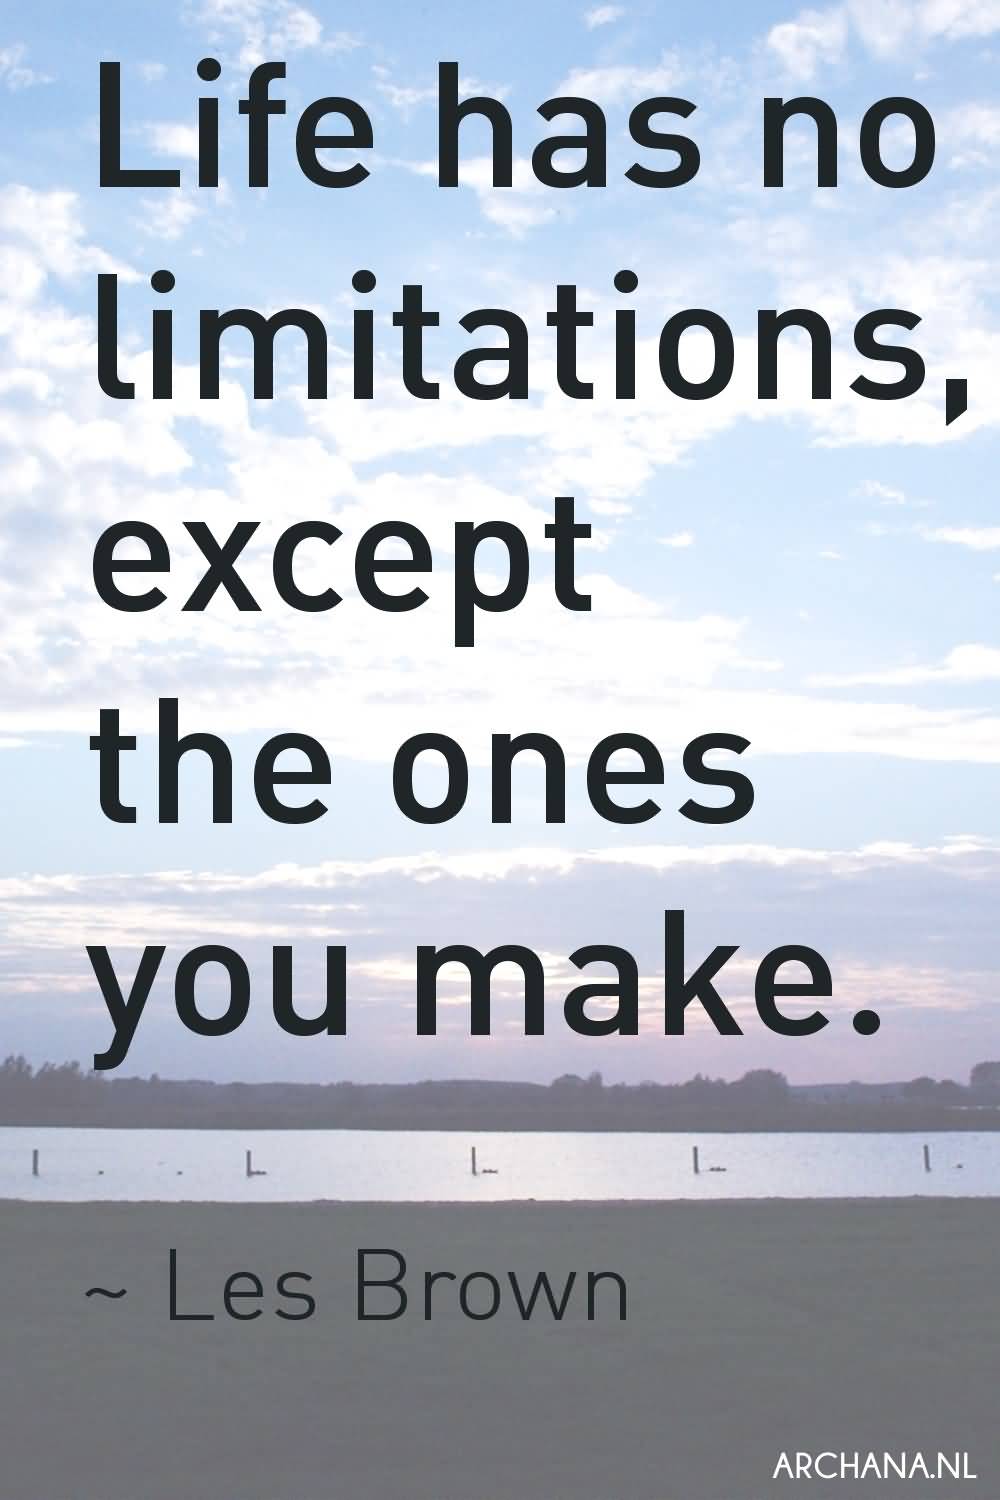 65 Best Limitation Quotes And Sayings For Inspiration